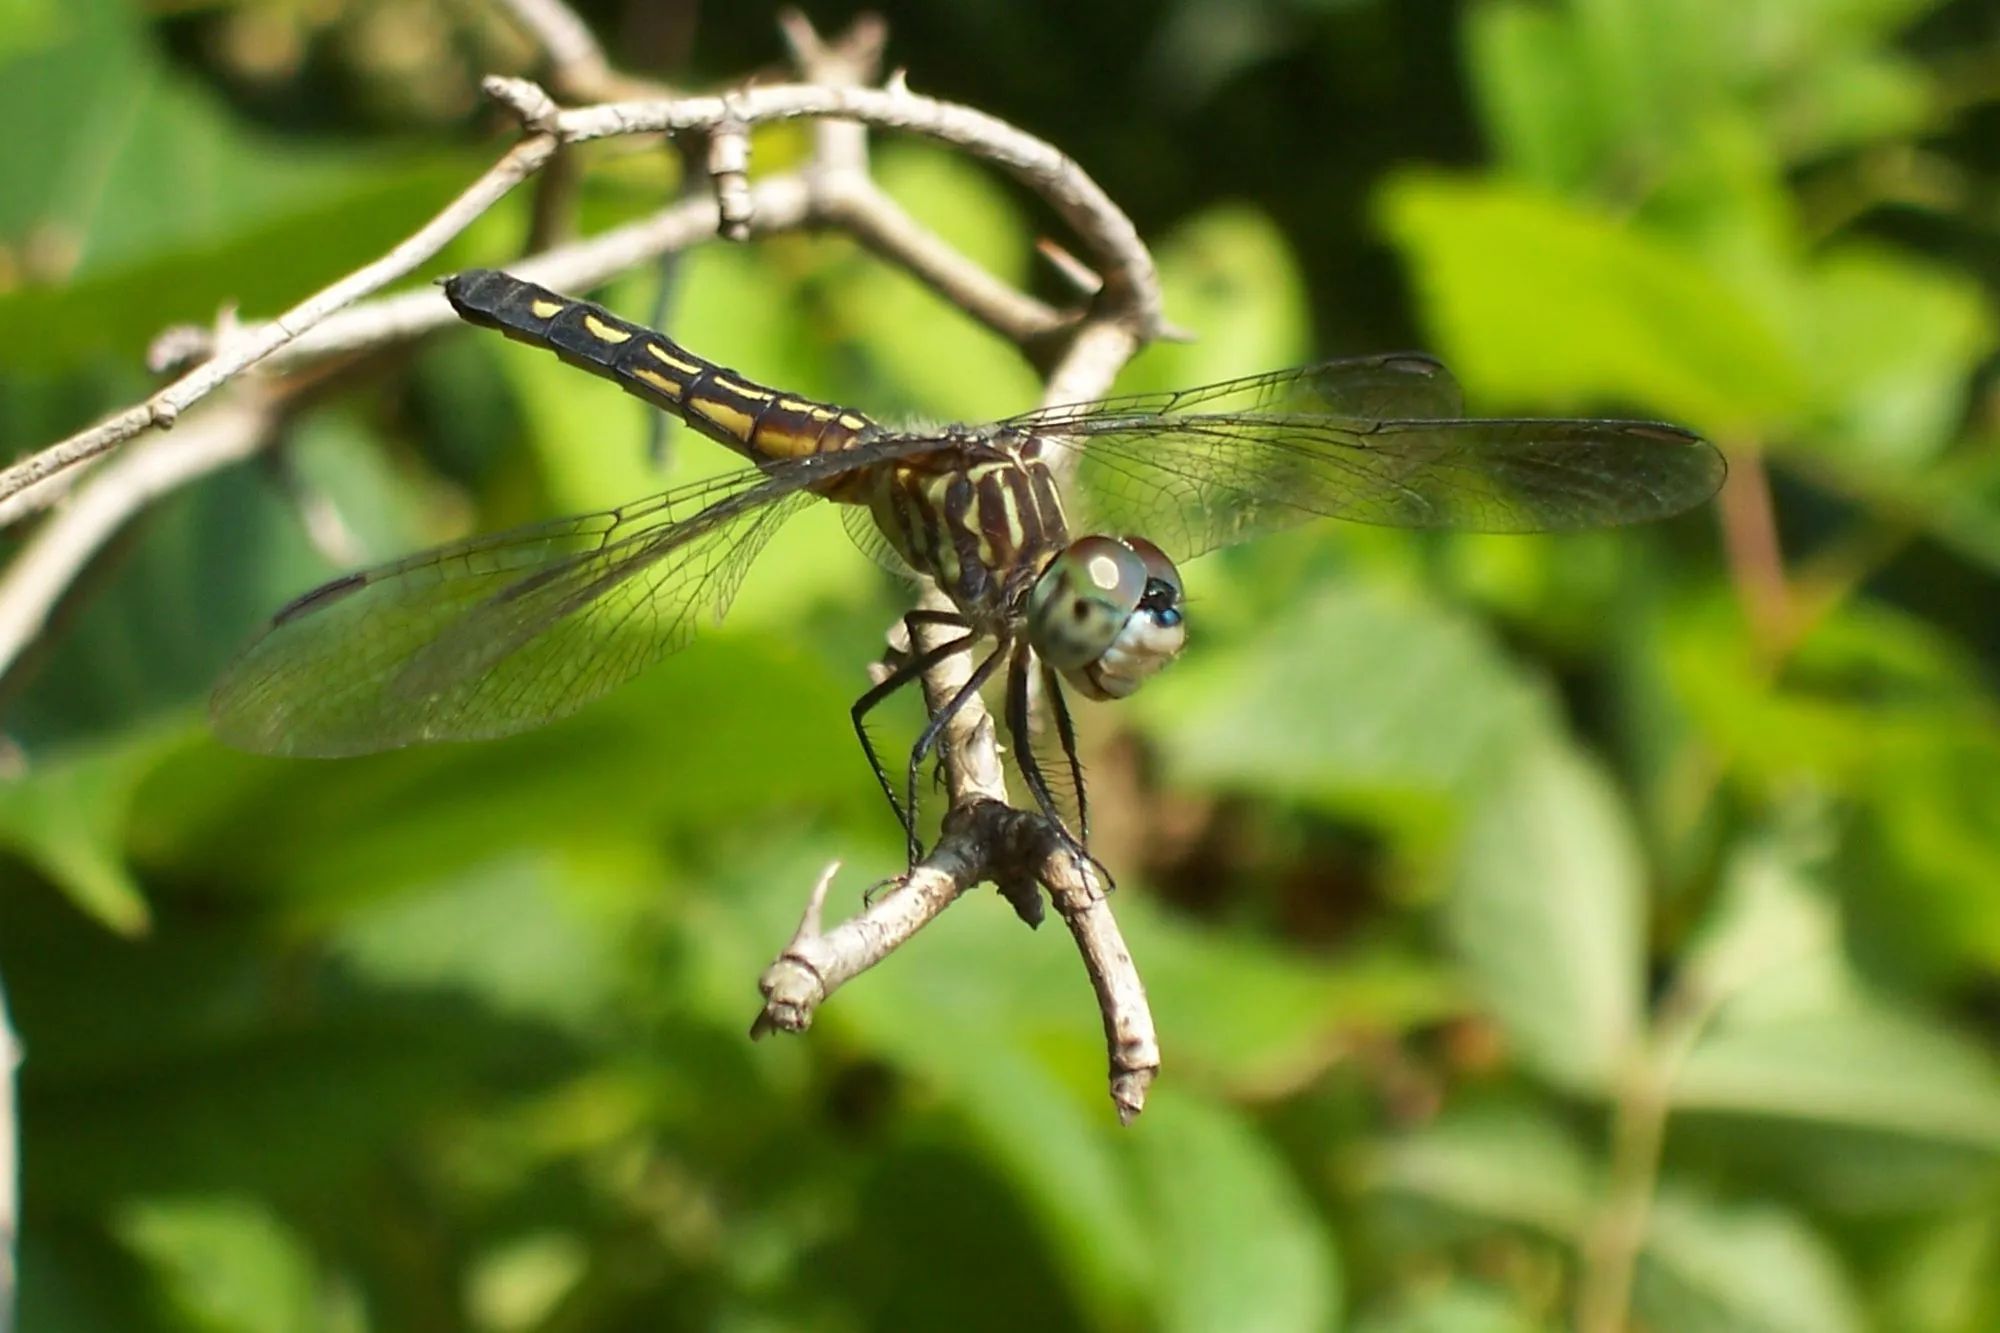 Common sanddragons are small to medium-sized flies with transparent wings.